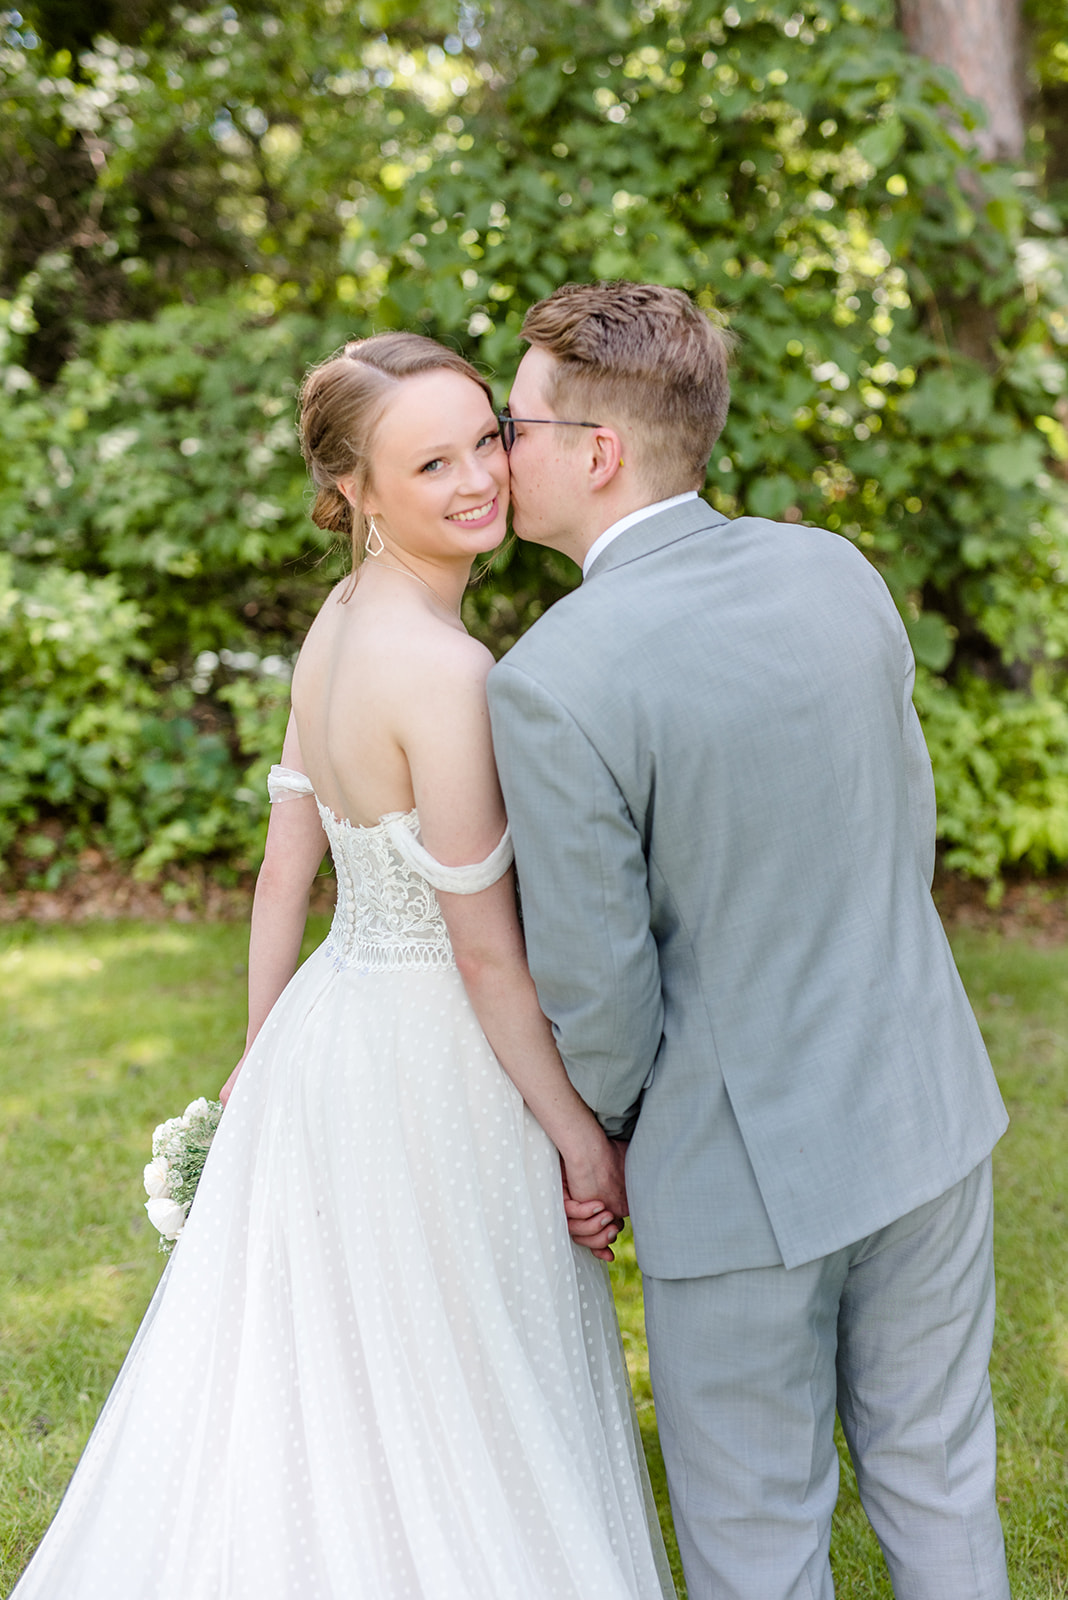 Bride looks back over her shoulder while the groom kisses her cheek